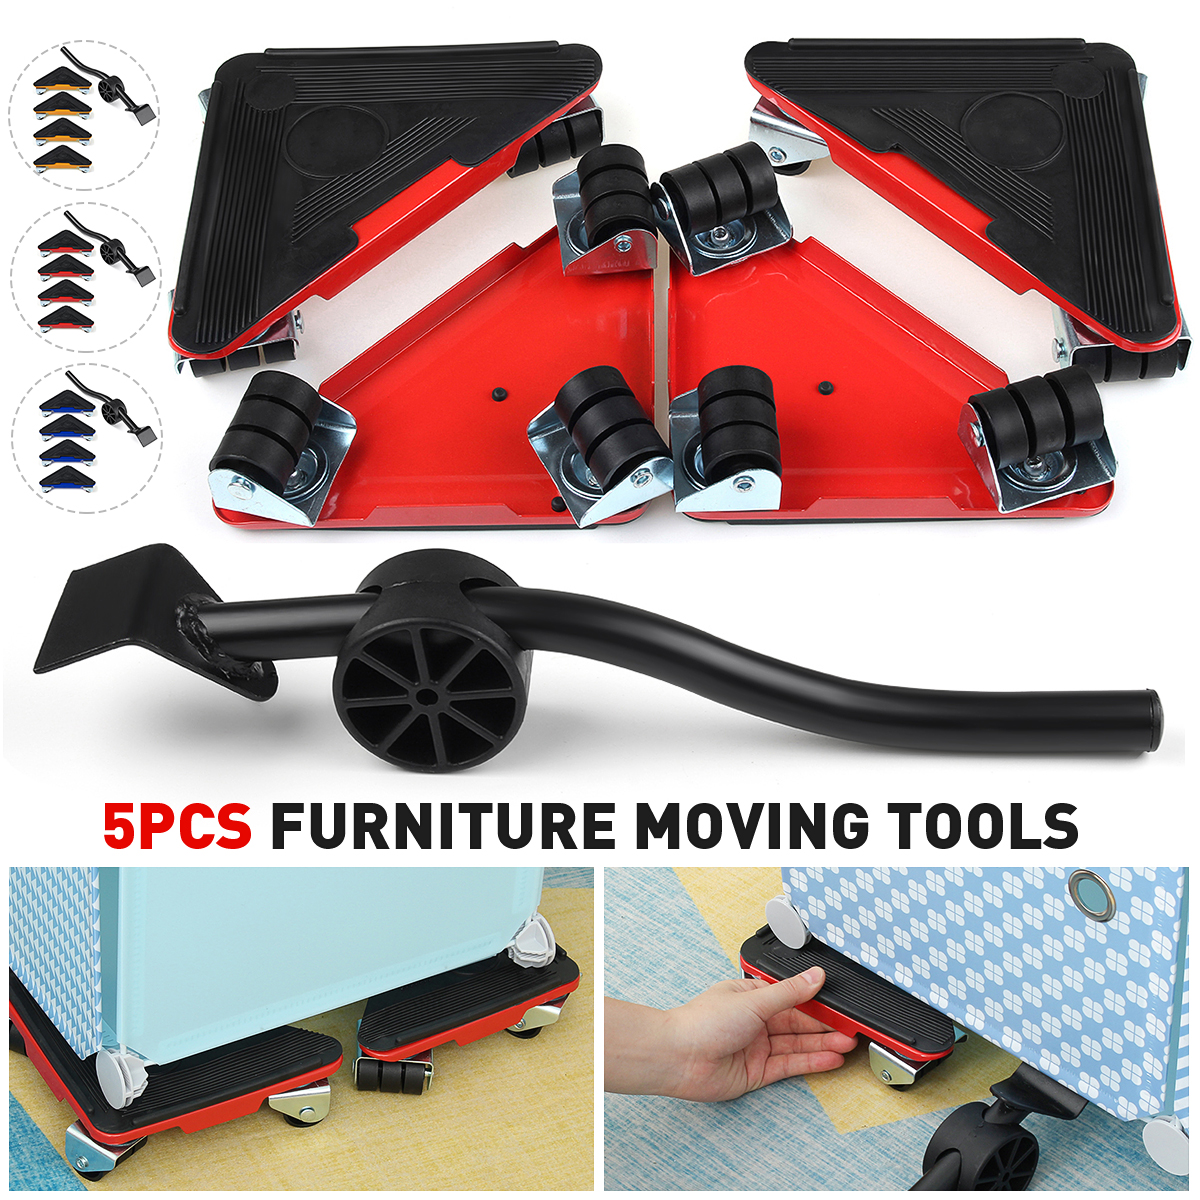 5pcs-Heavy-Duty-Furniture-Slider-Lifter-Movers-Tool-Kit-Roller-Transport-Trolley-1762957-1